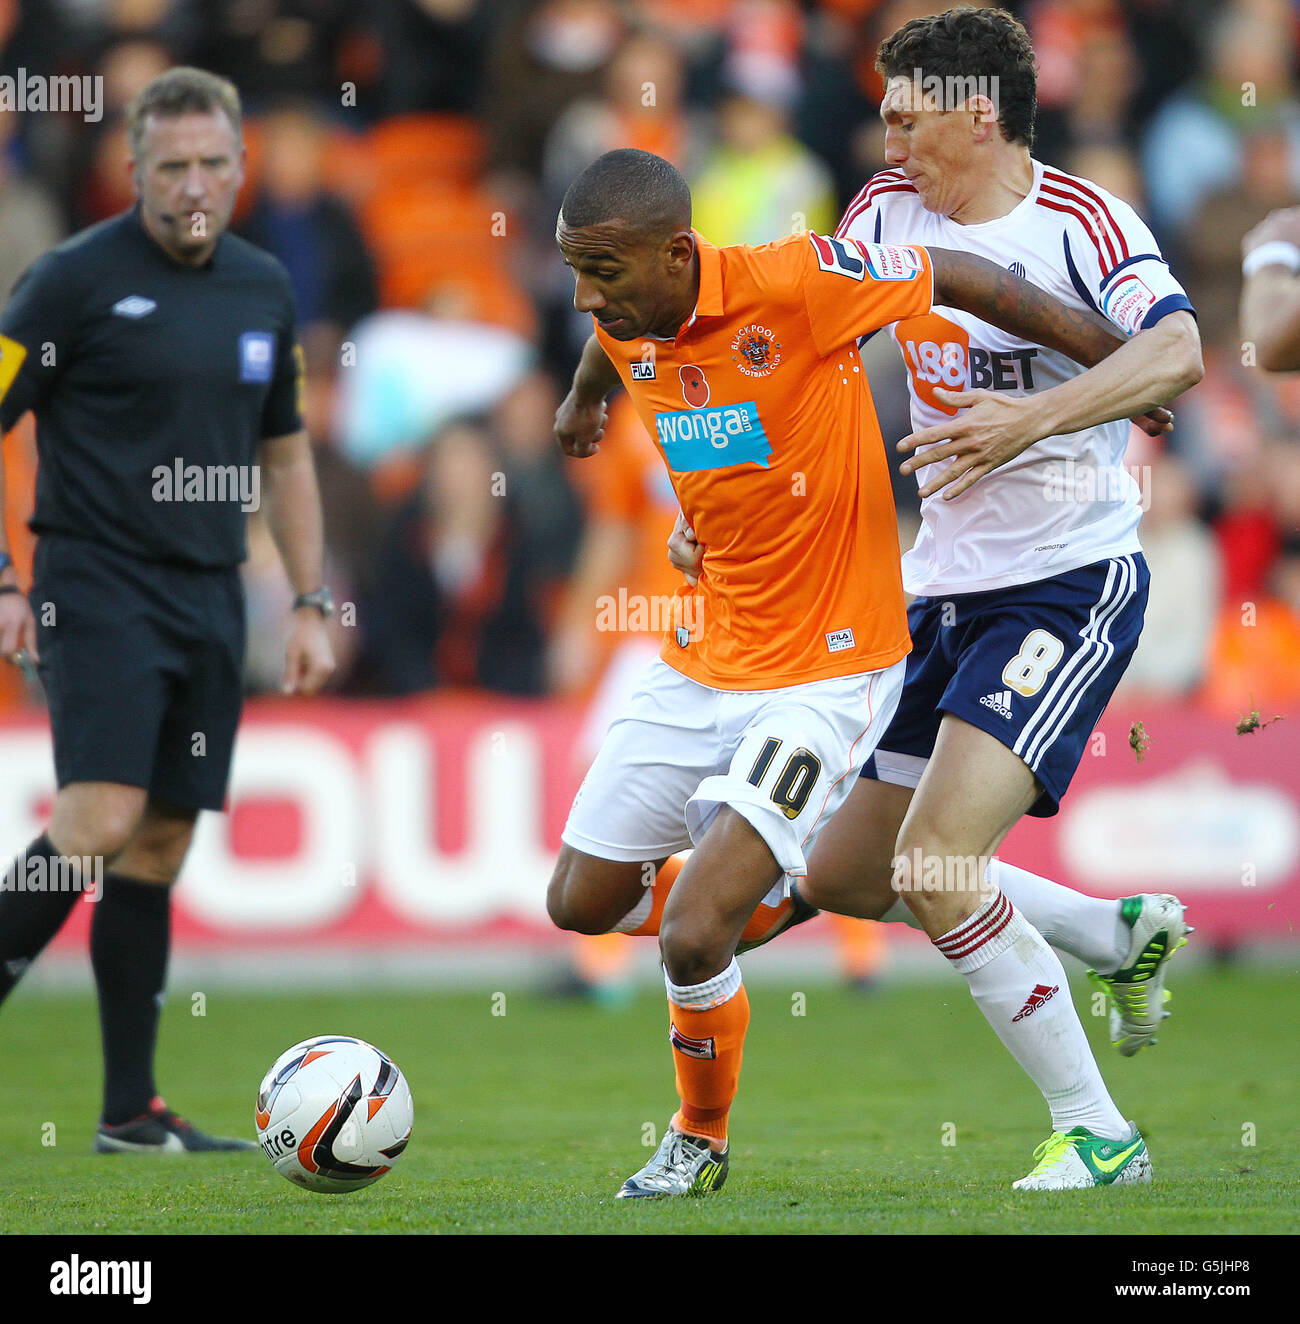 Blackpool's Elliott Grandin and Bolton's Keith Andrews during the npower Football League Championship match at Bloomfield Road, Blackpool. Stock Photo